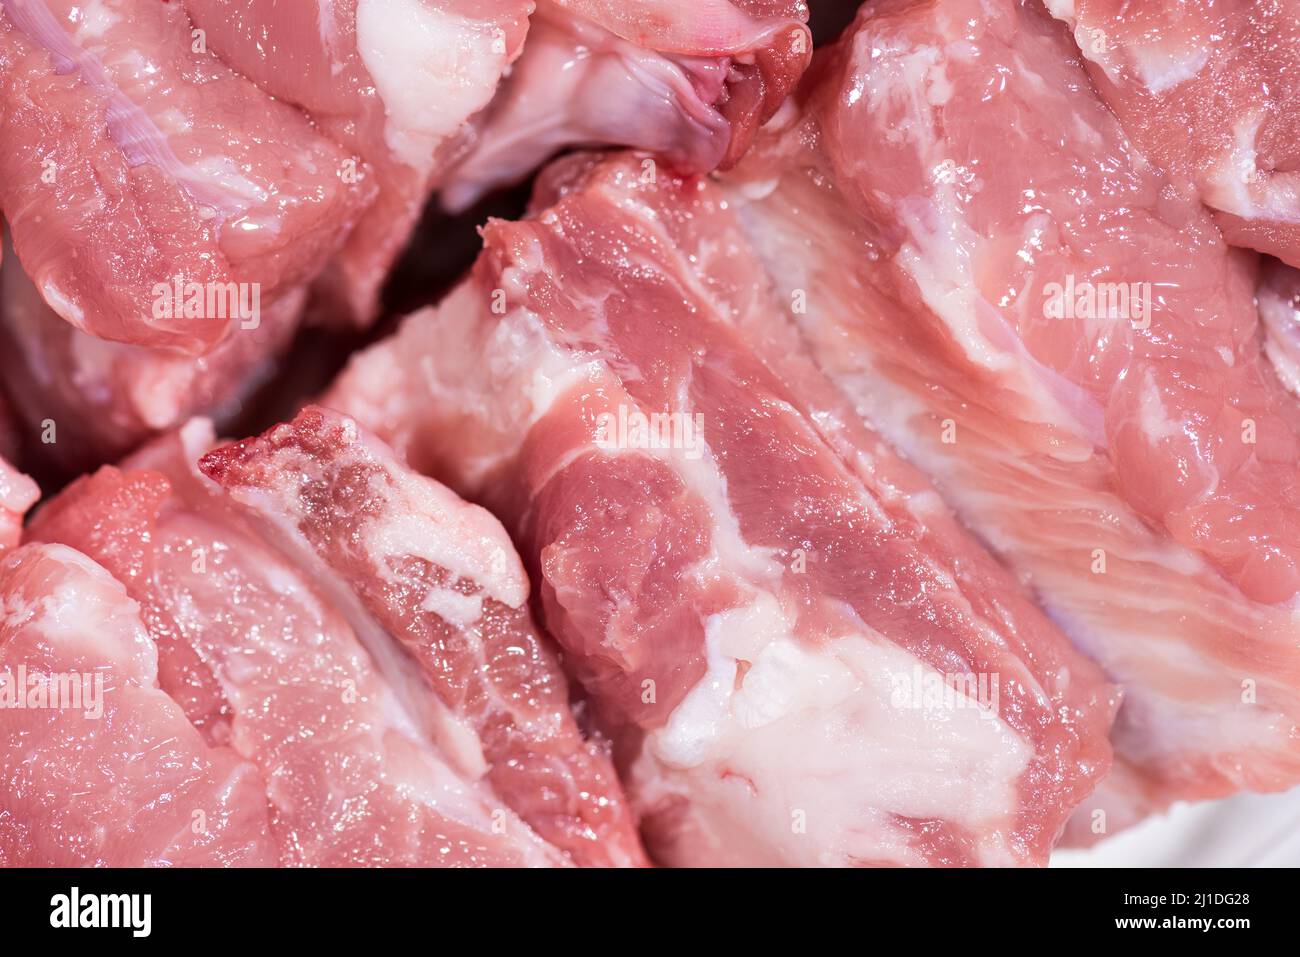 Close up top view pack pieces raw meat of pork loin on bone, fresh red pork with white fat of pork rib, Cut into pieces and put them in a row Stock Photo